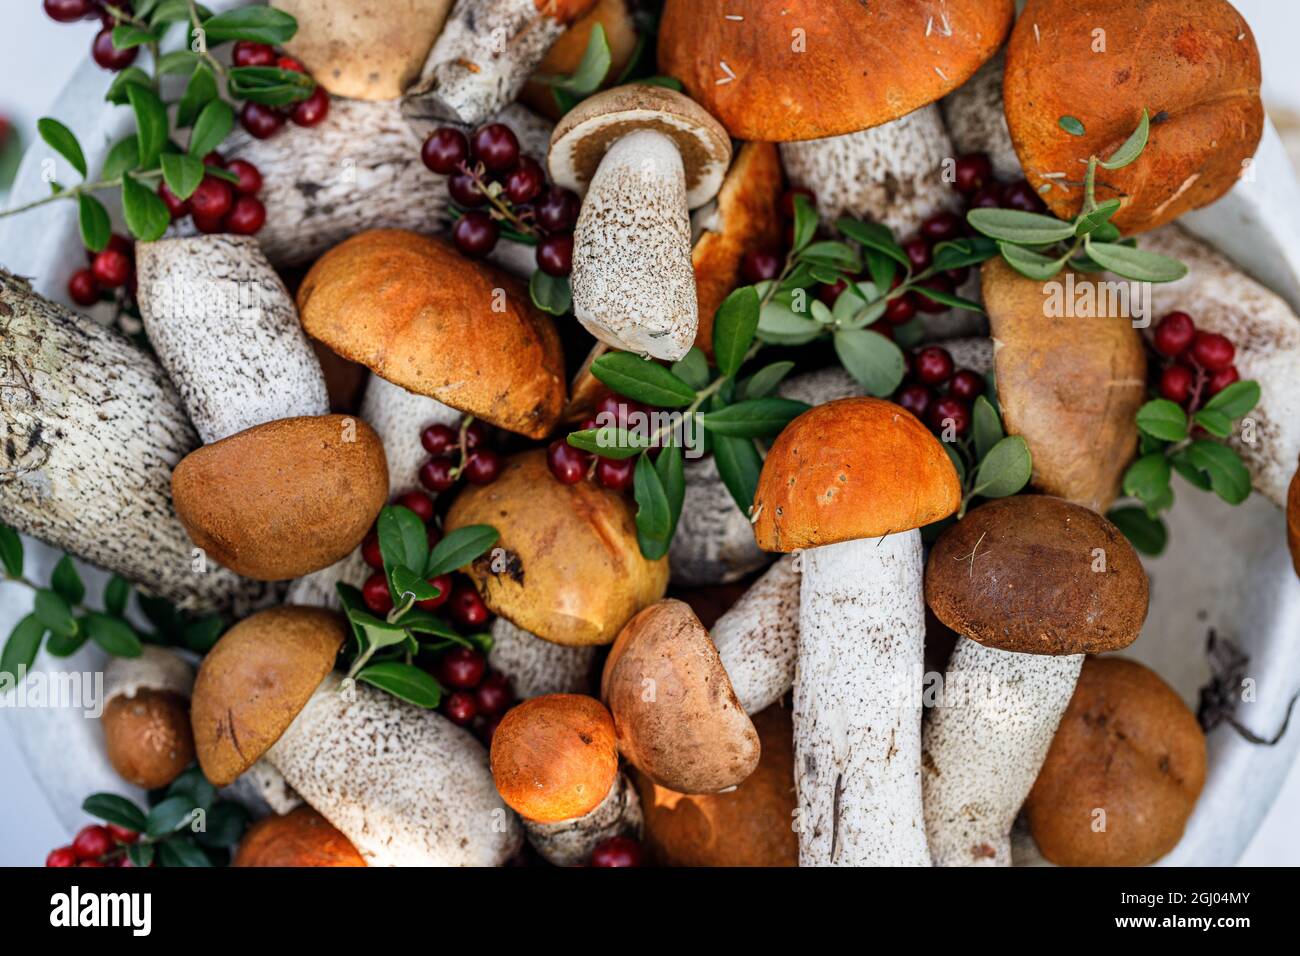 Orange boletus mushrooms and lingonberry in buckets on a rustic background. Collecting wild mushrooms and berries in the forest. Autumn season of edib Stock Photo